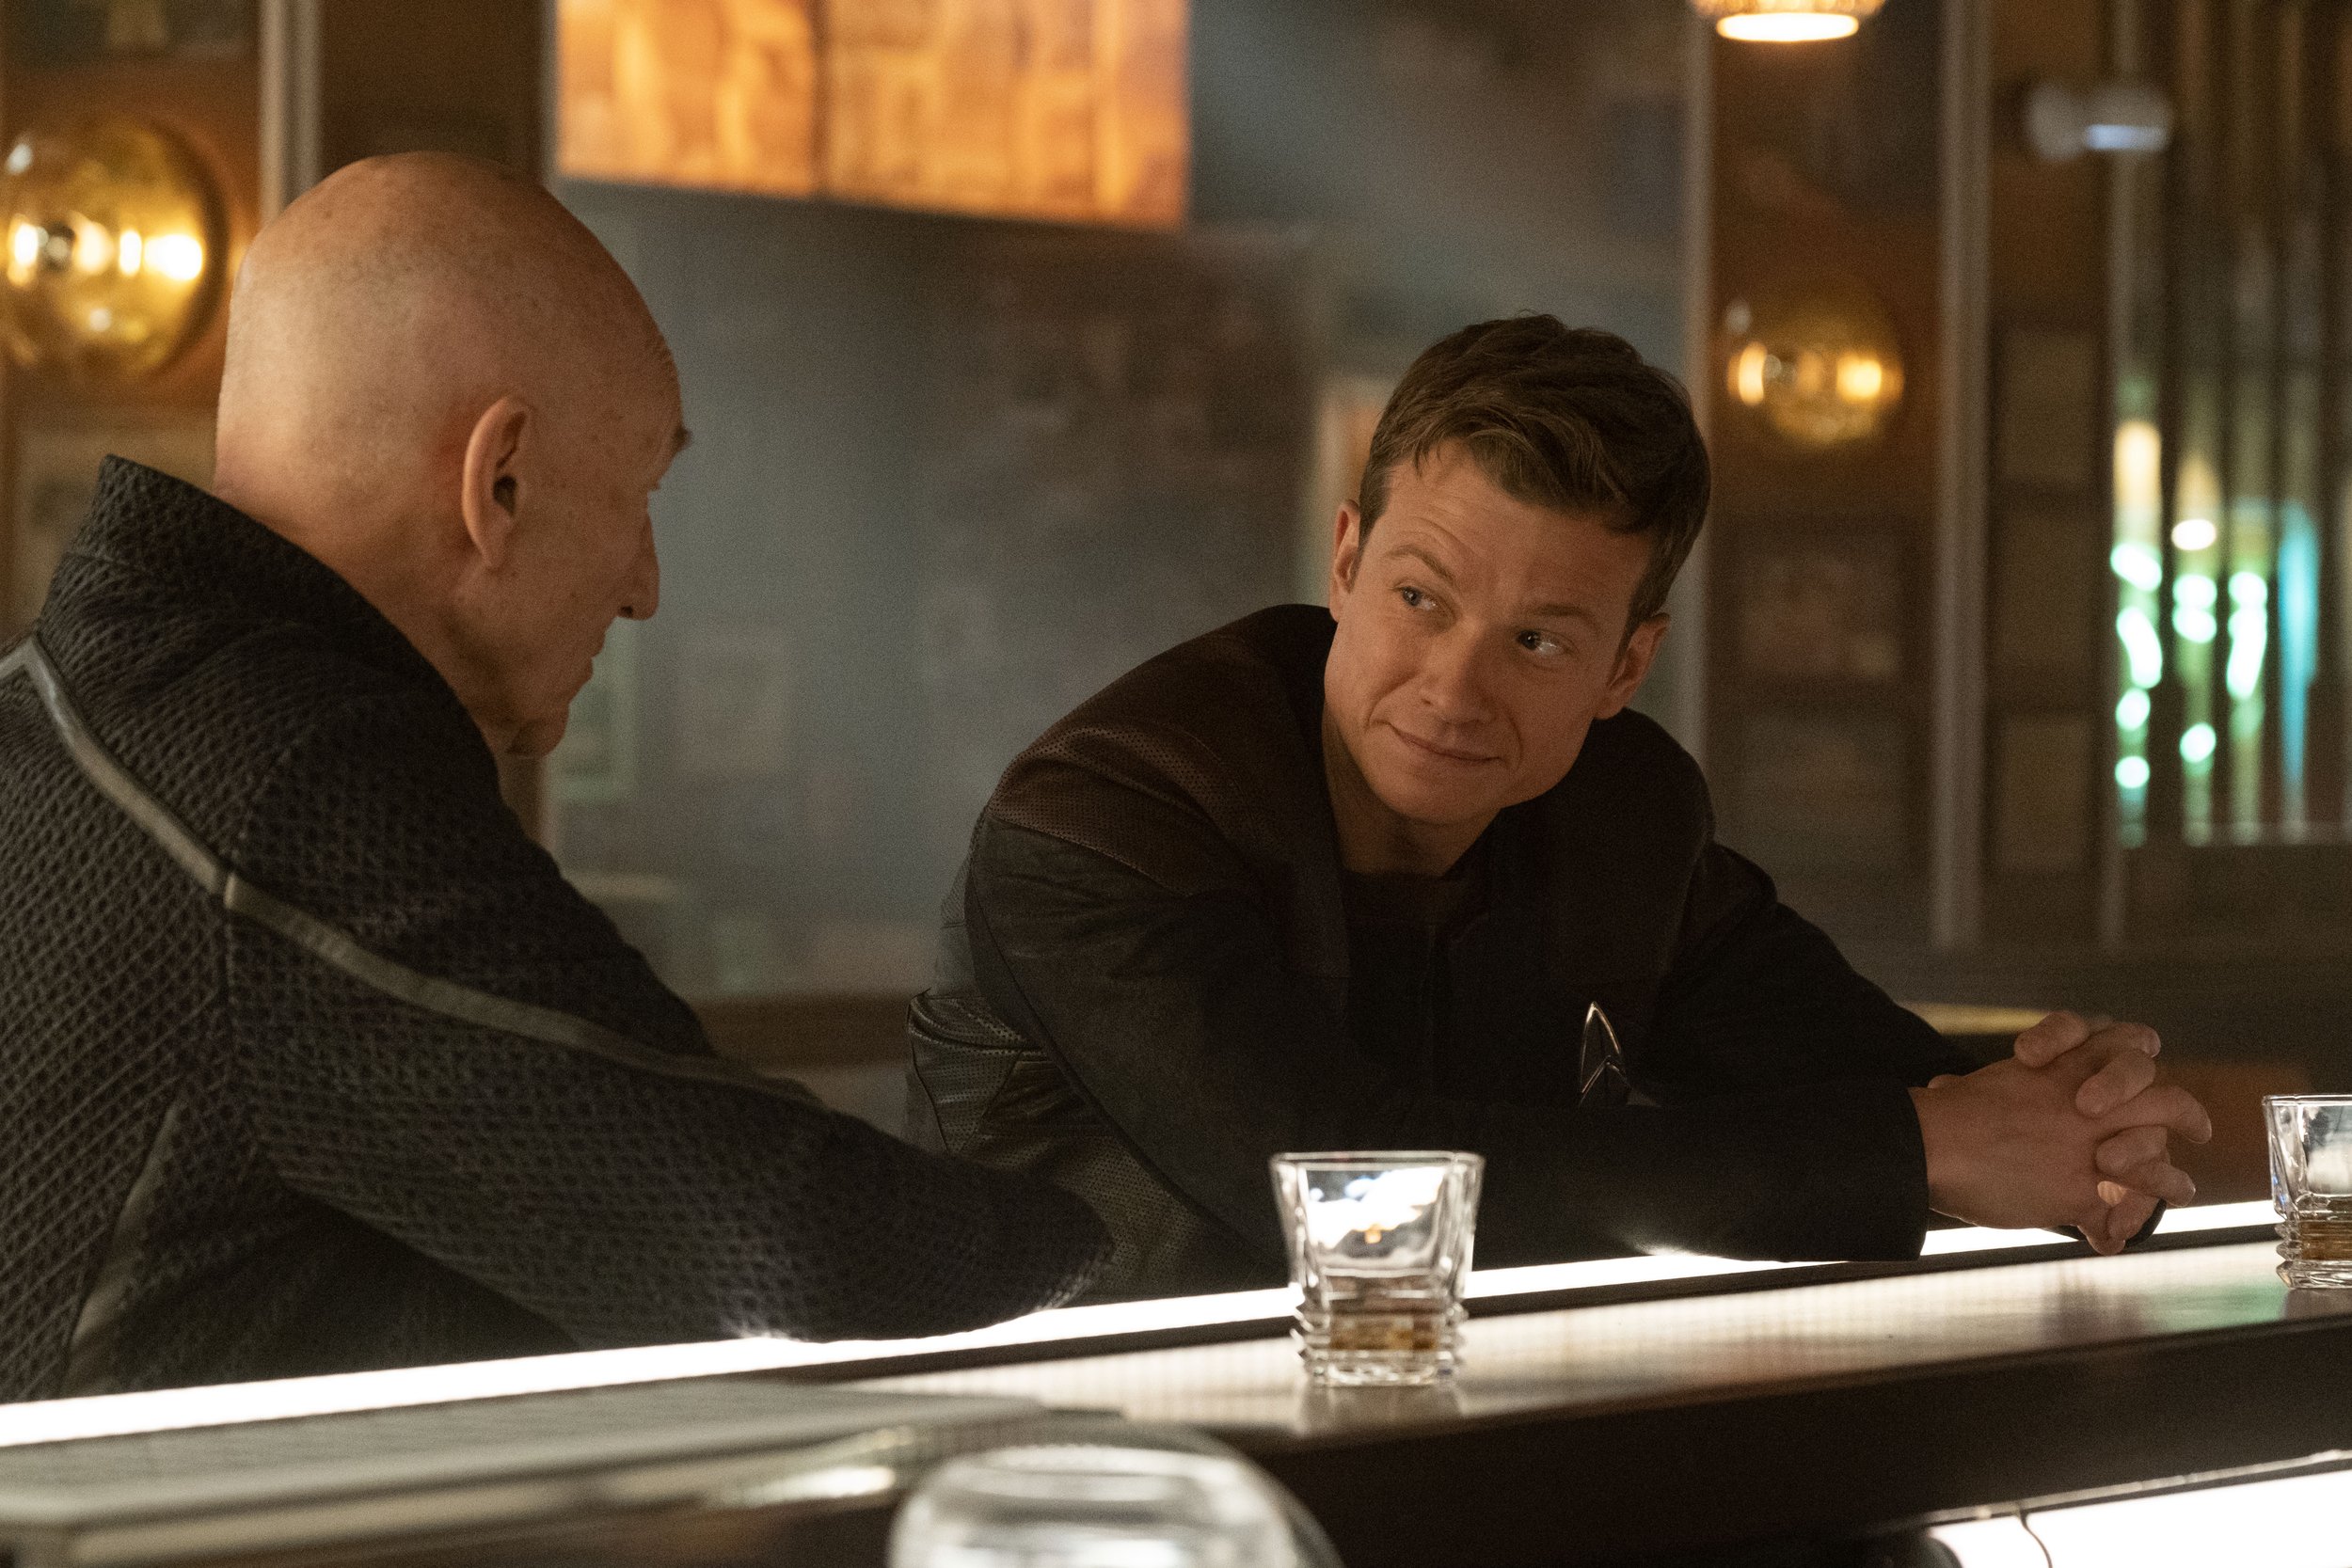   Patrick Stewart  as Picard and  Ed Speleers  as Jack Crusher.  Photo Credit: Trae Patton/Paramount+.  